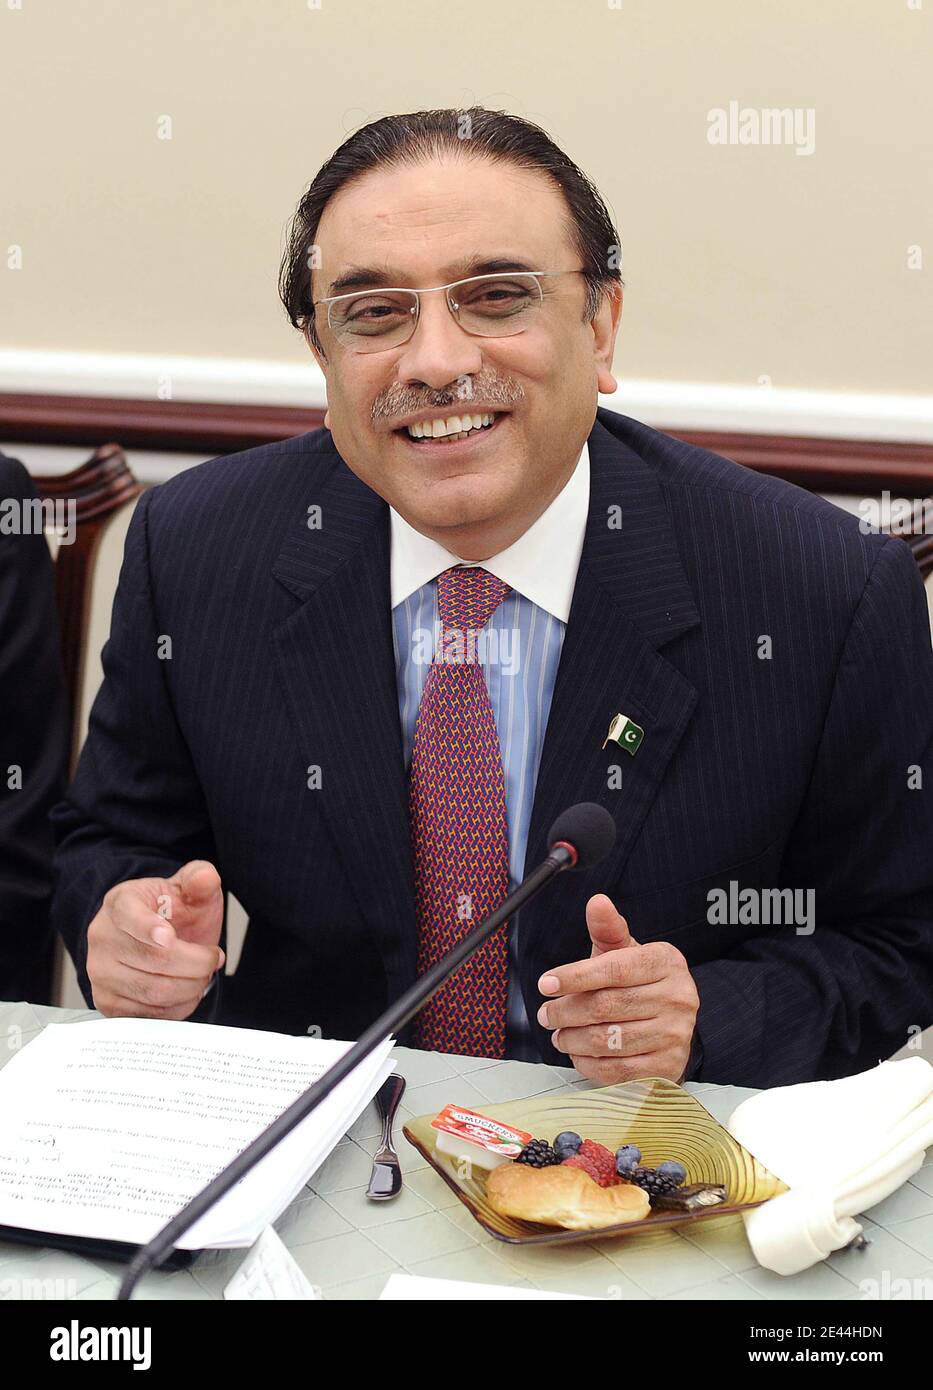 Pakistani President Asif Ali Zardari attends a closed meeting with The House Foreign AffairsÀCommittee, May 5, 2009 in Washington, DC. Photo by Olivier Douliery/ABACAPRESS.COM Stock Photo